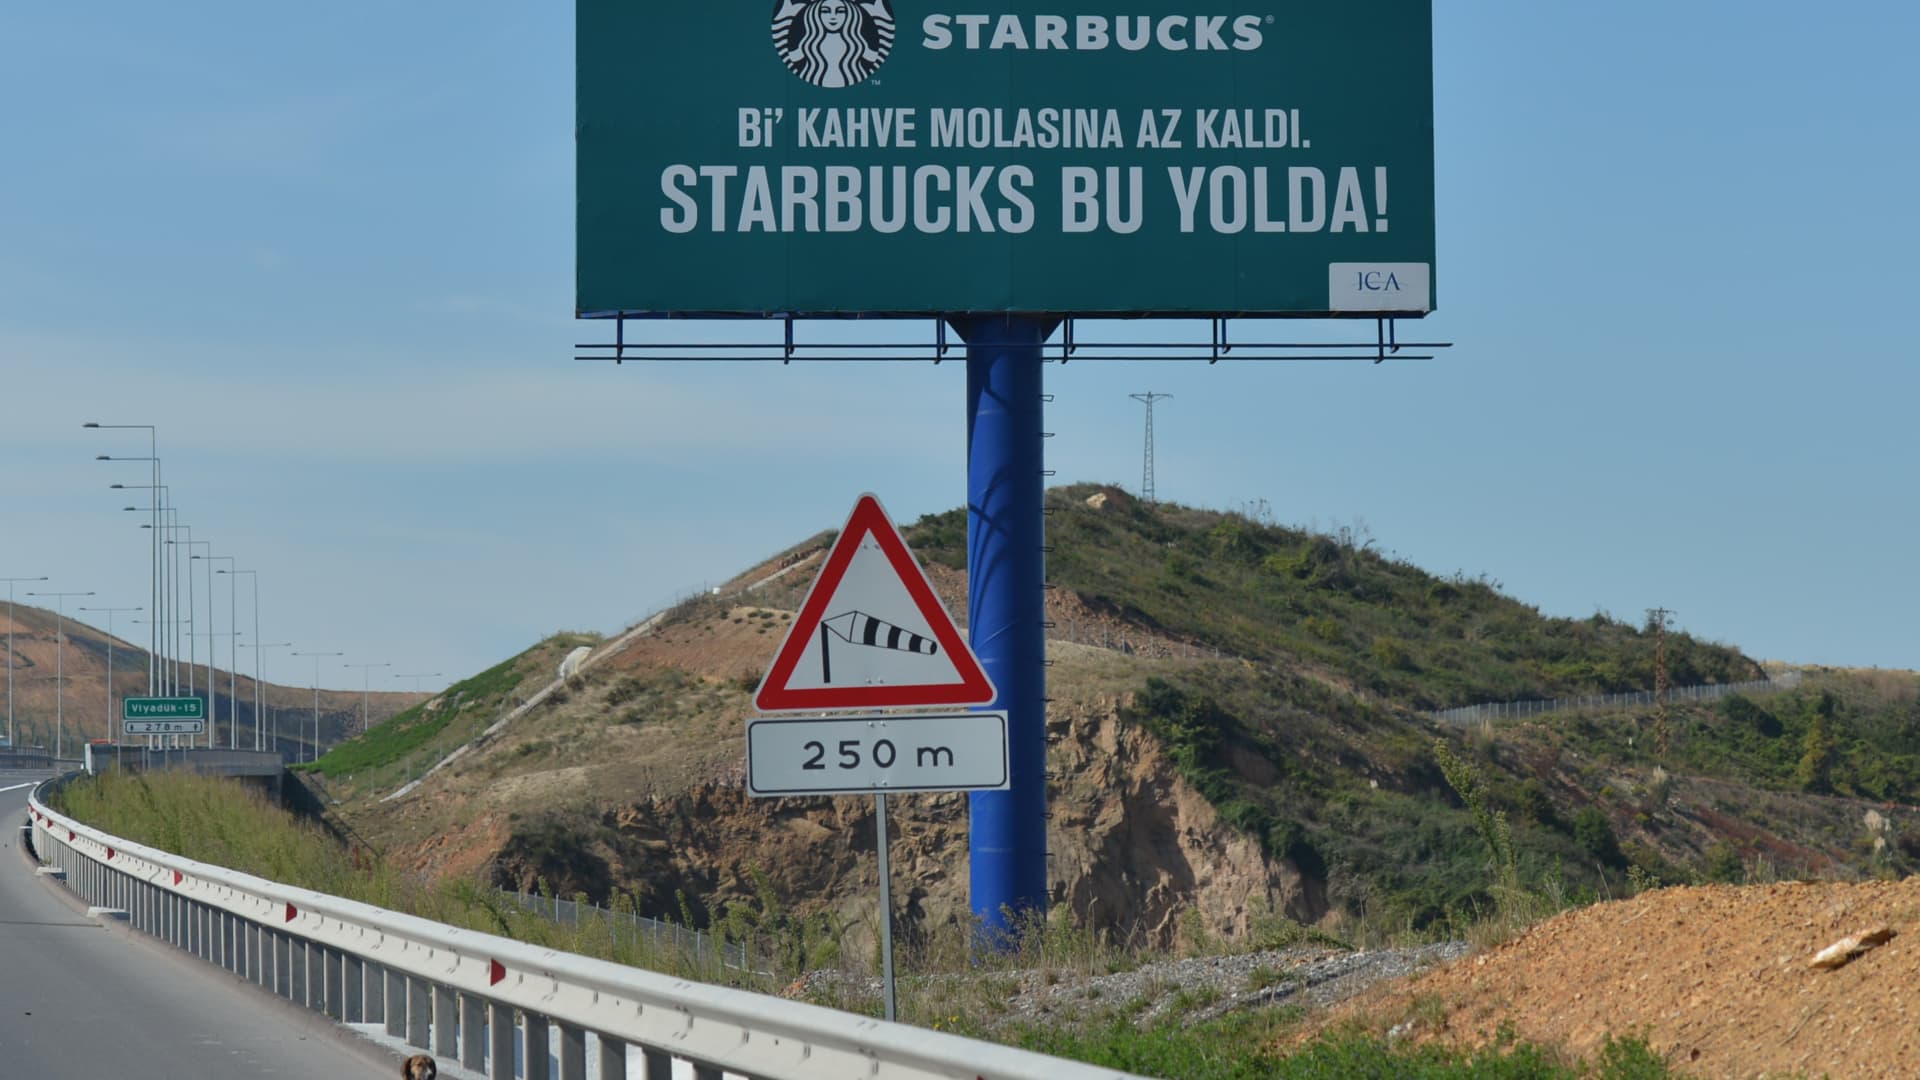 An advertisement for Starbucks seen on the motorway near Istanbul on Tuesday, 17 October 2017.